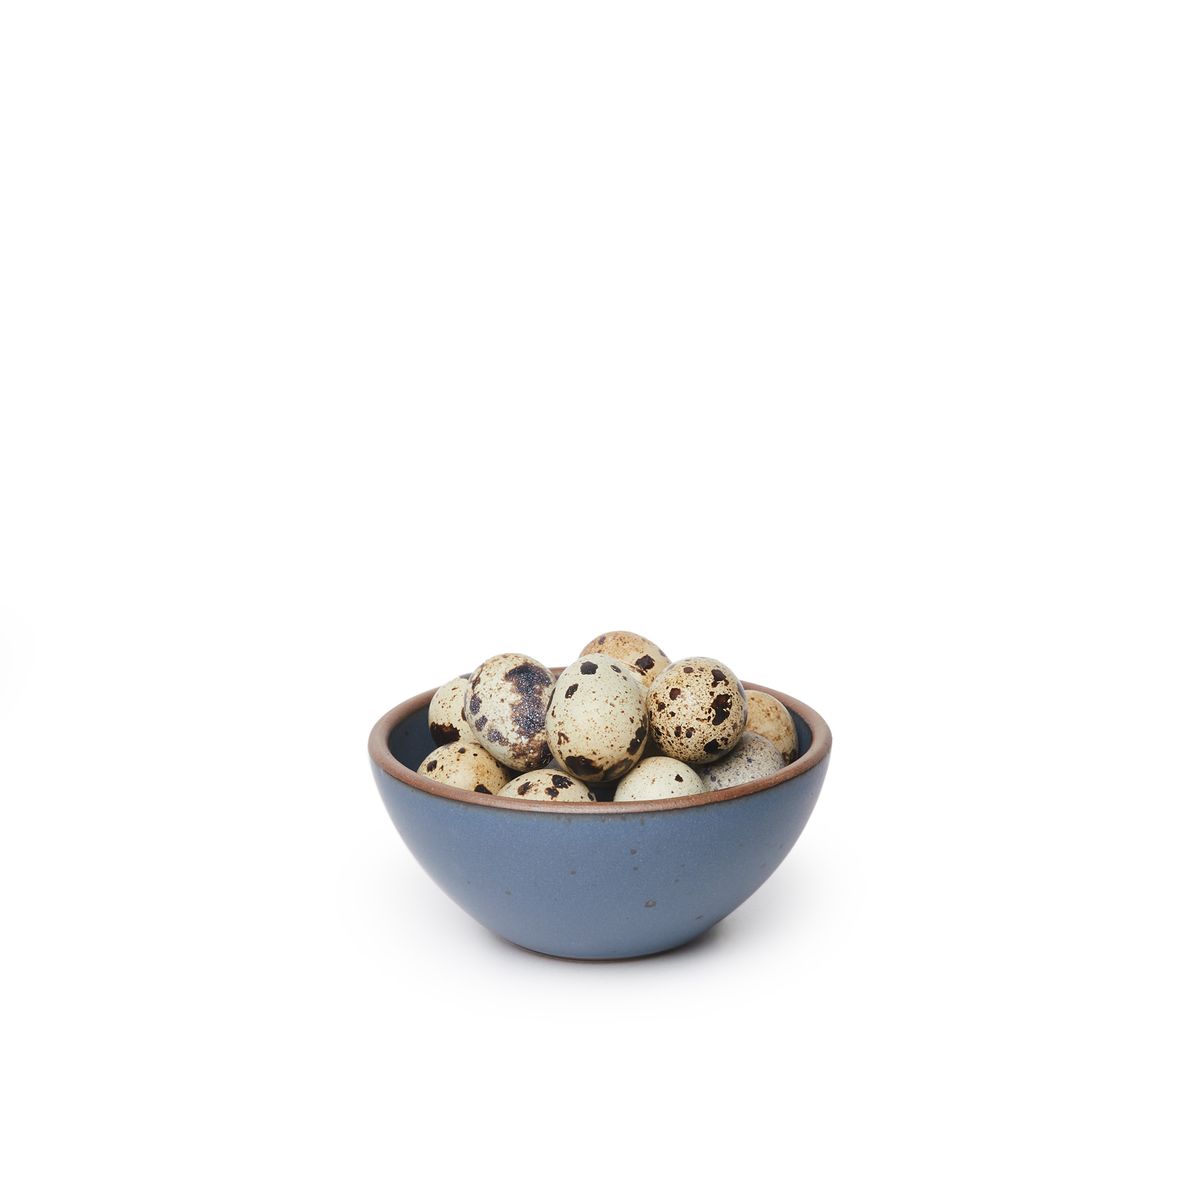 A small dessert sized rounded ceramic bowl in a toned-down navy color featuring iron speckles and an unglazed rim, filled with quail eggs